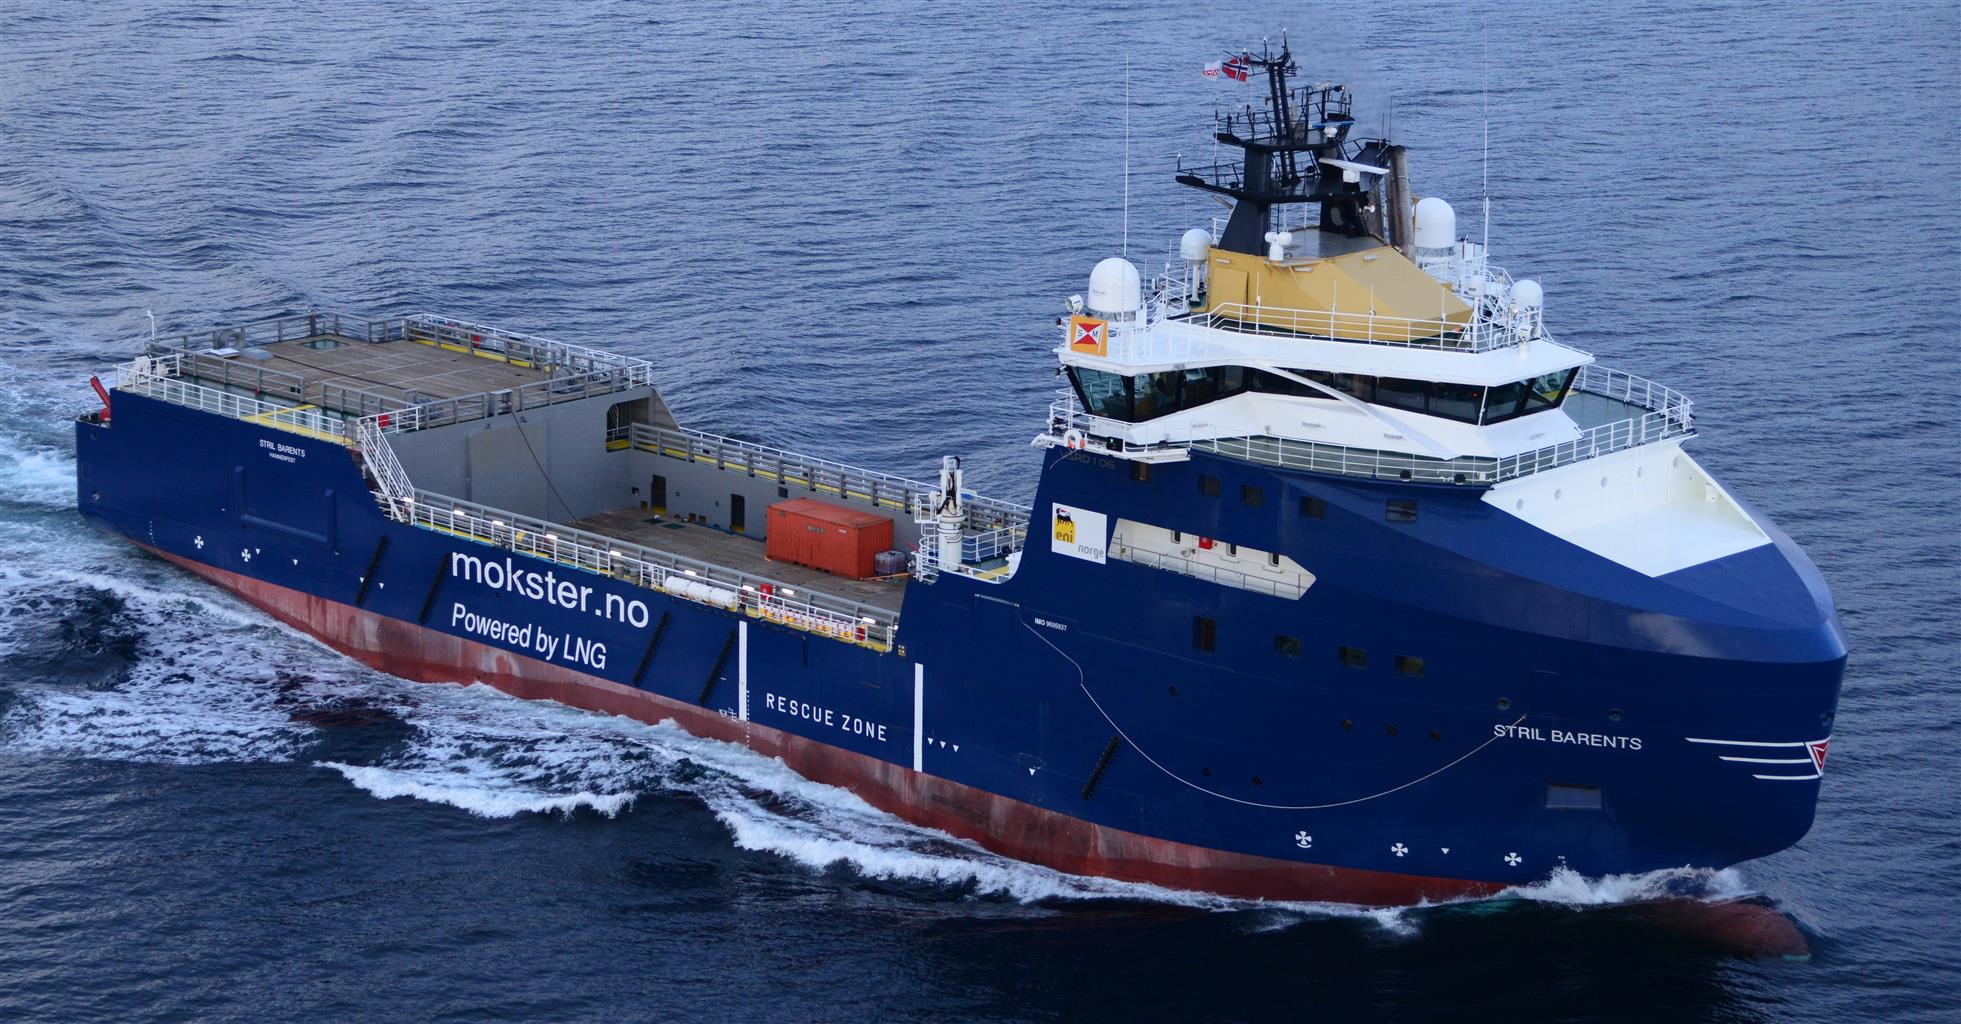 Simon Mokster looking to supply ammonia to LNG-powered vessels